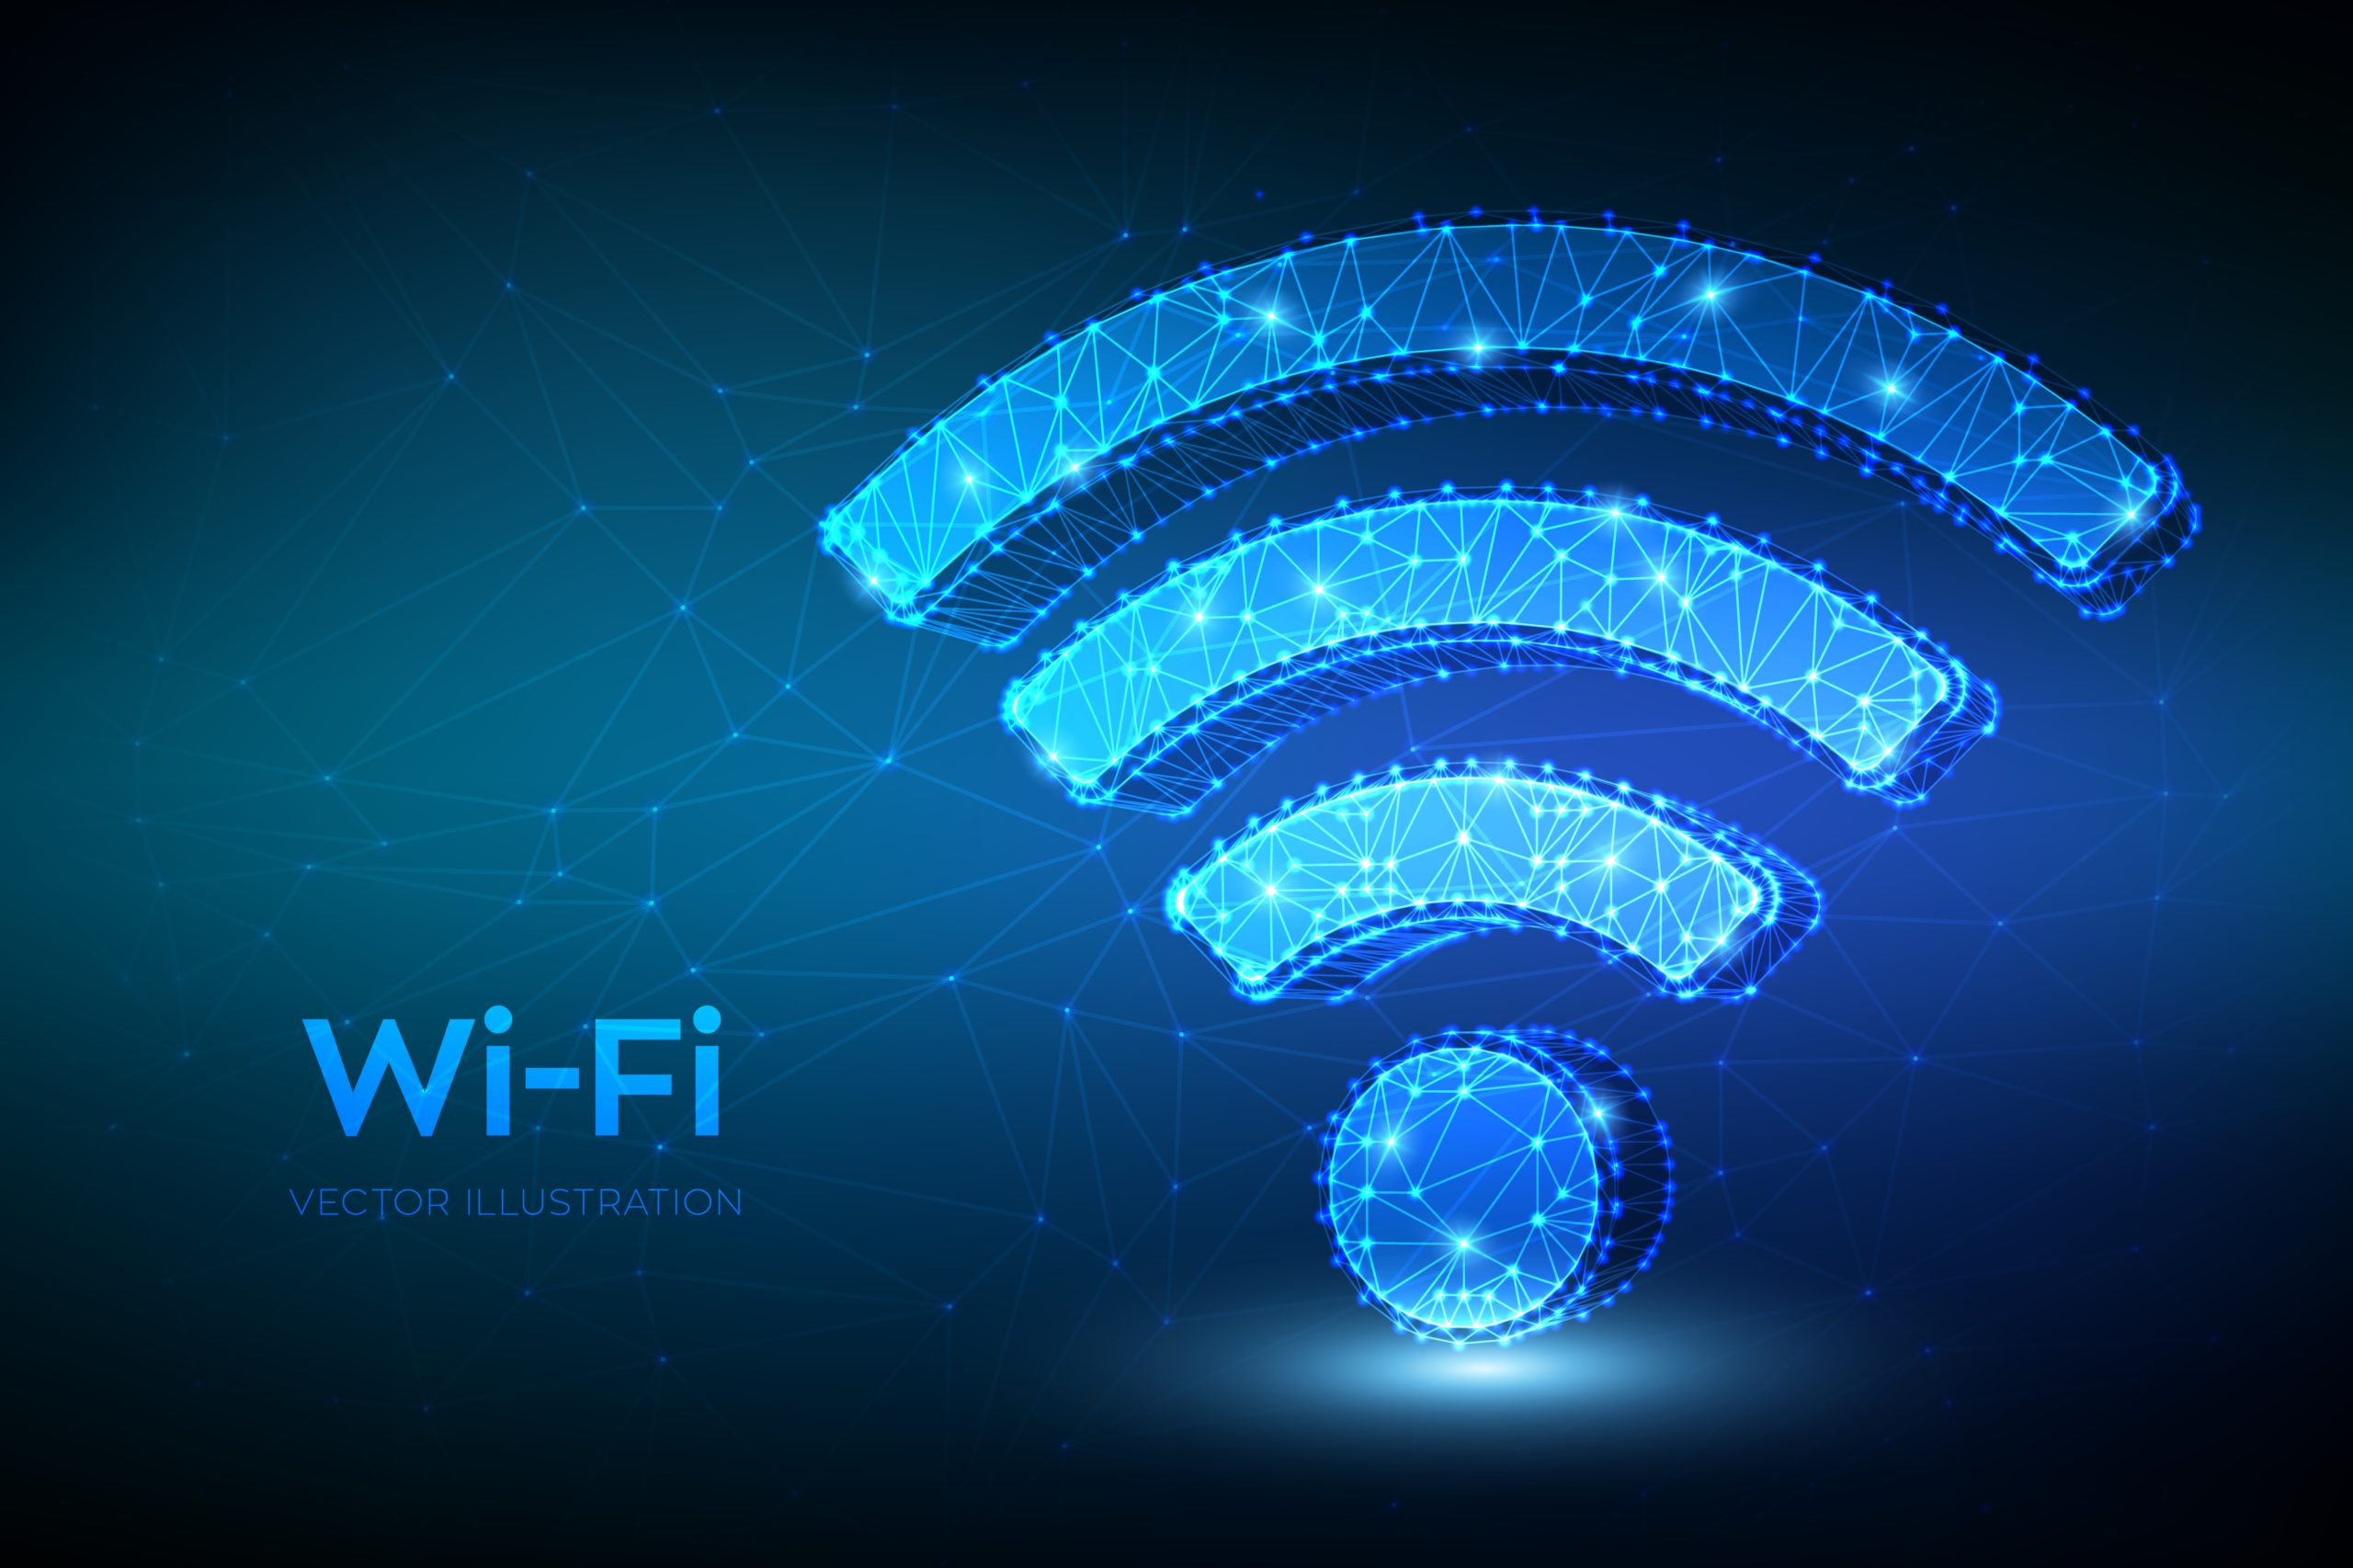 The New Wi-Fi Driver for Android: All You Need to Know!